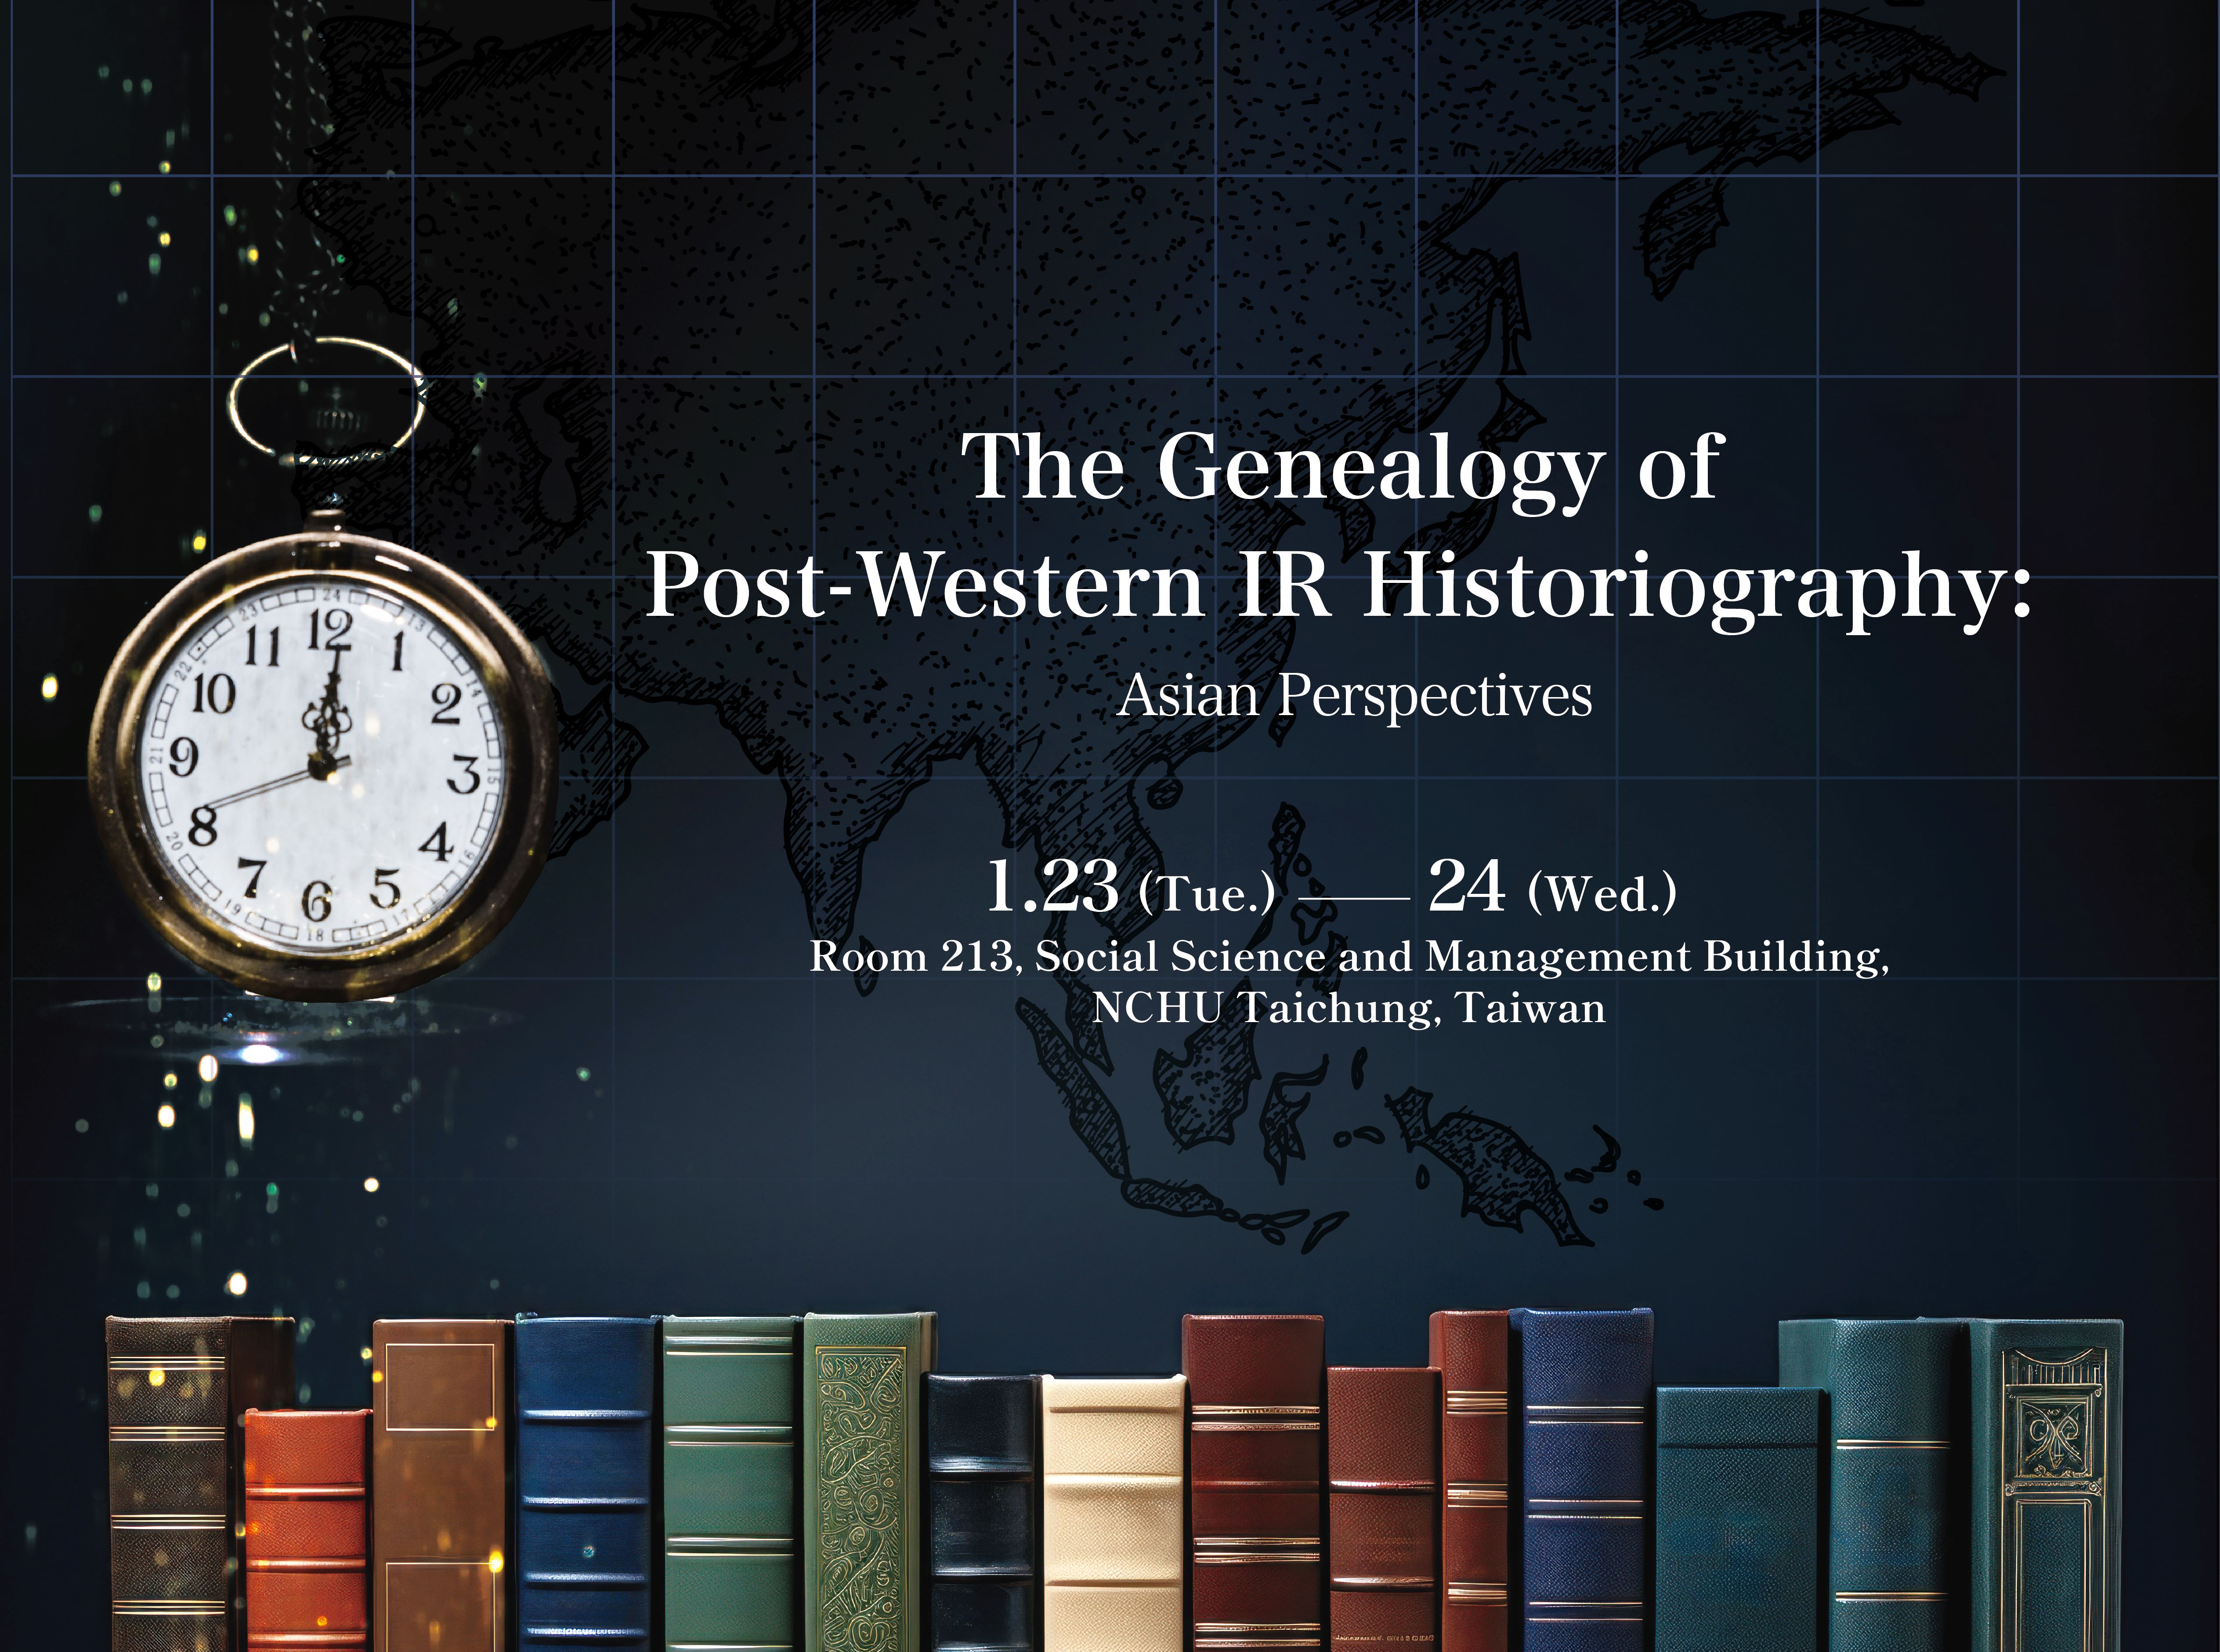 The Genealogy of Post-Western IR Historiography: Asian Perspectives